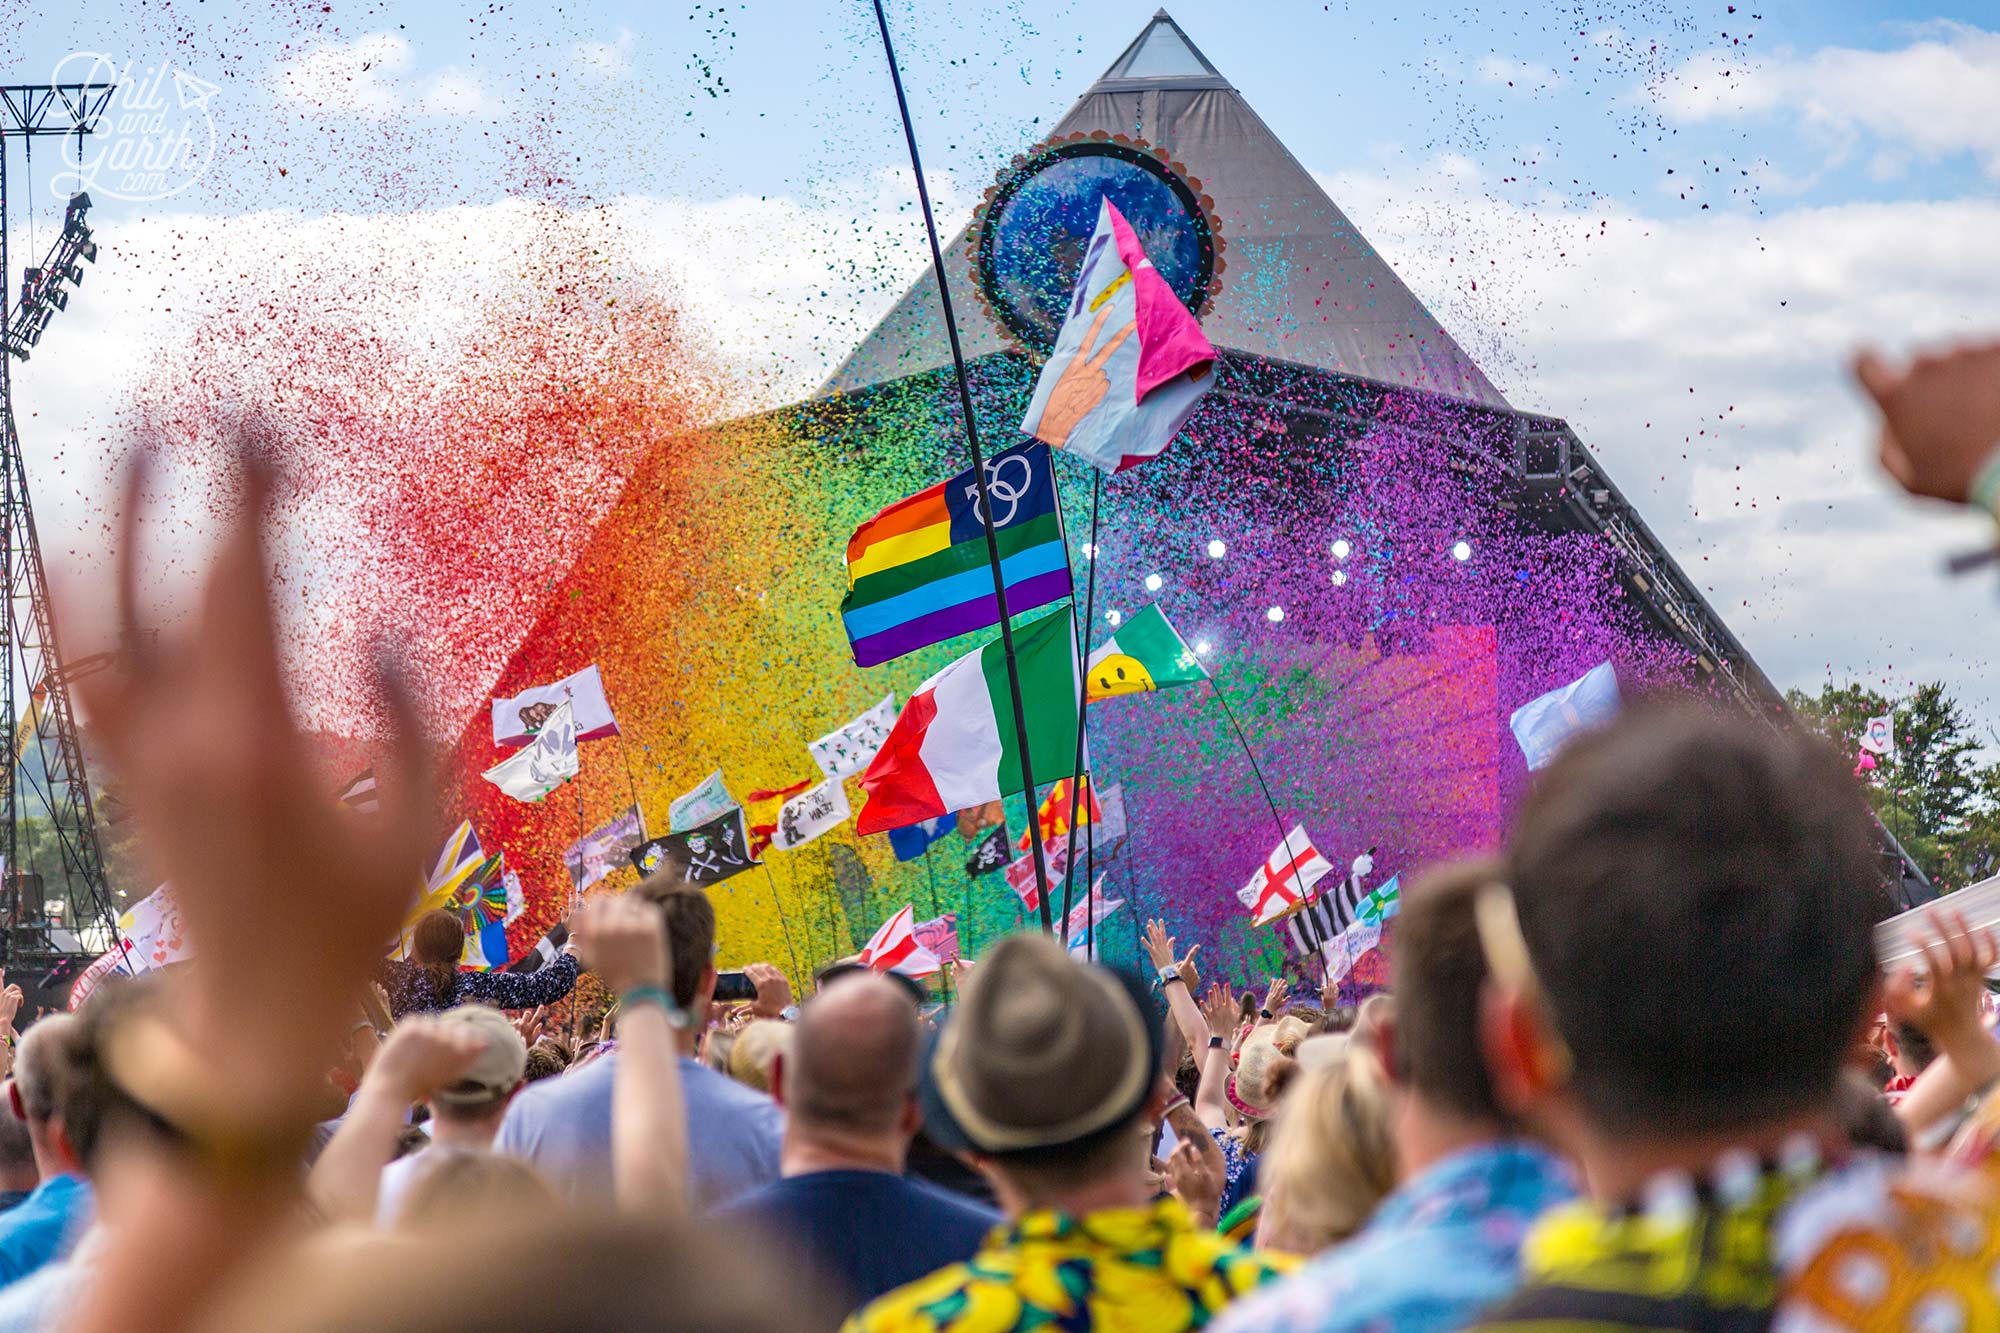 Colourful scenes at the Glastonbury Festival of performing arts